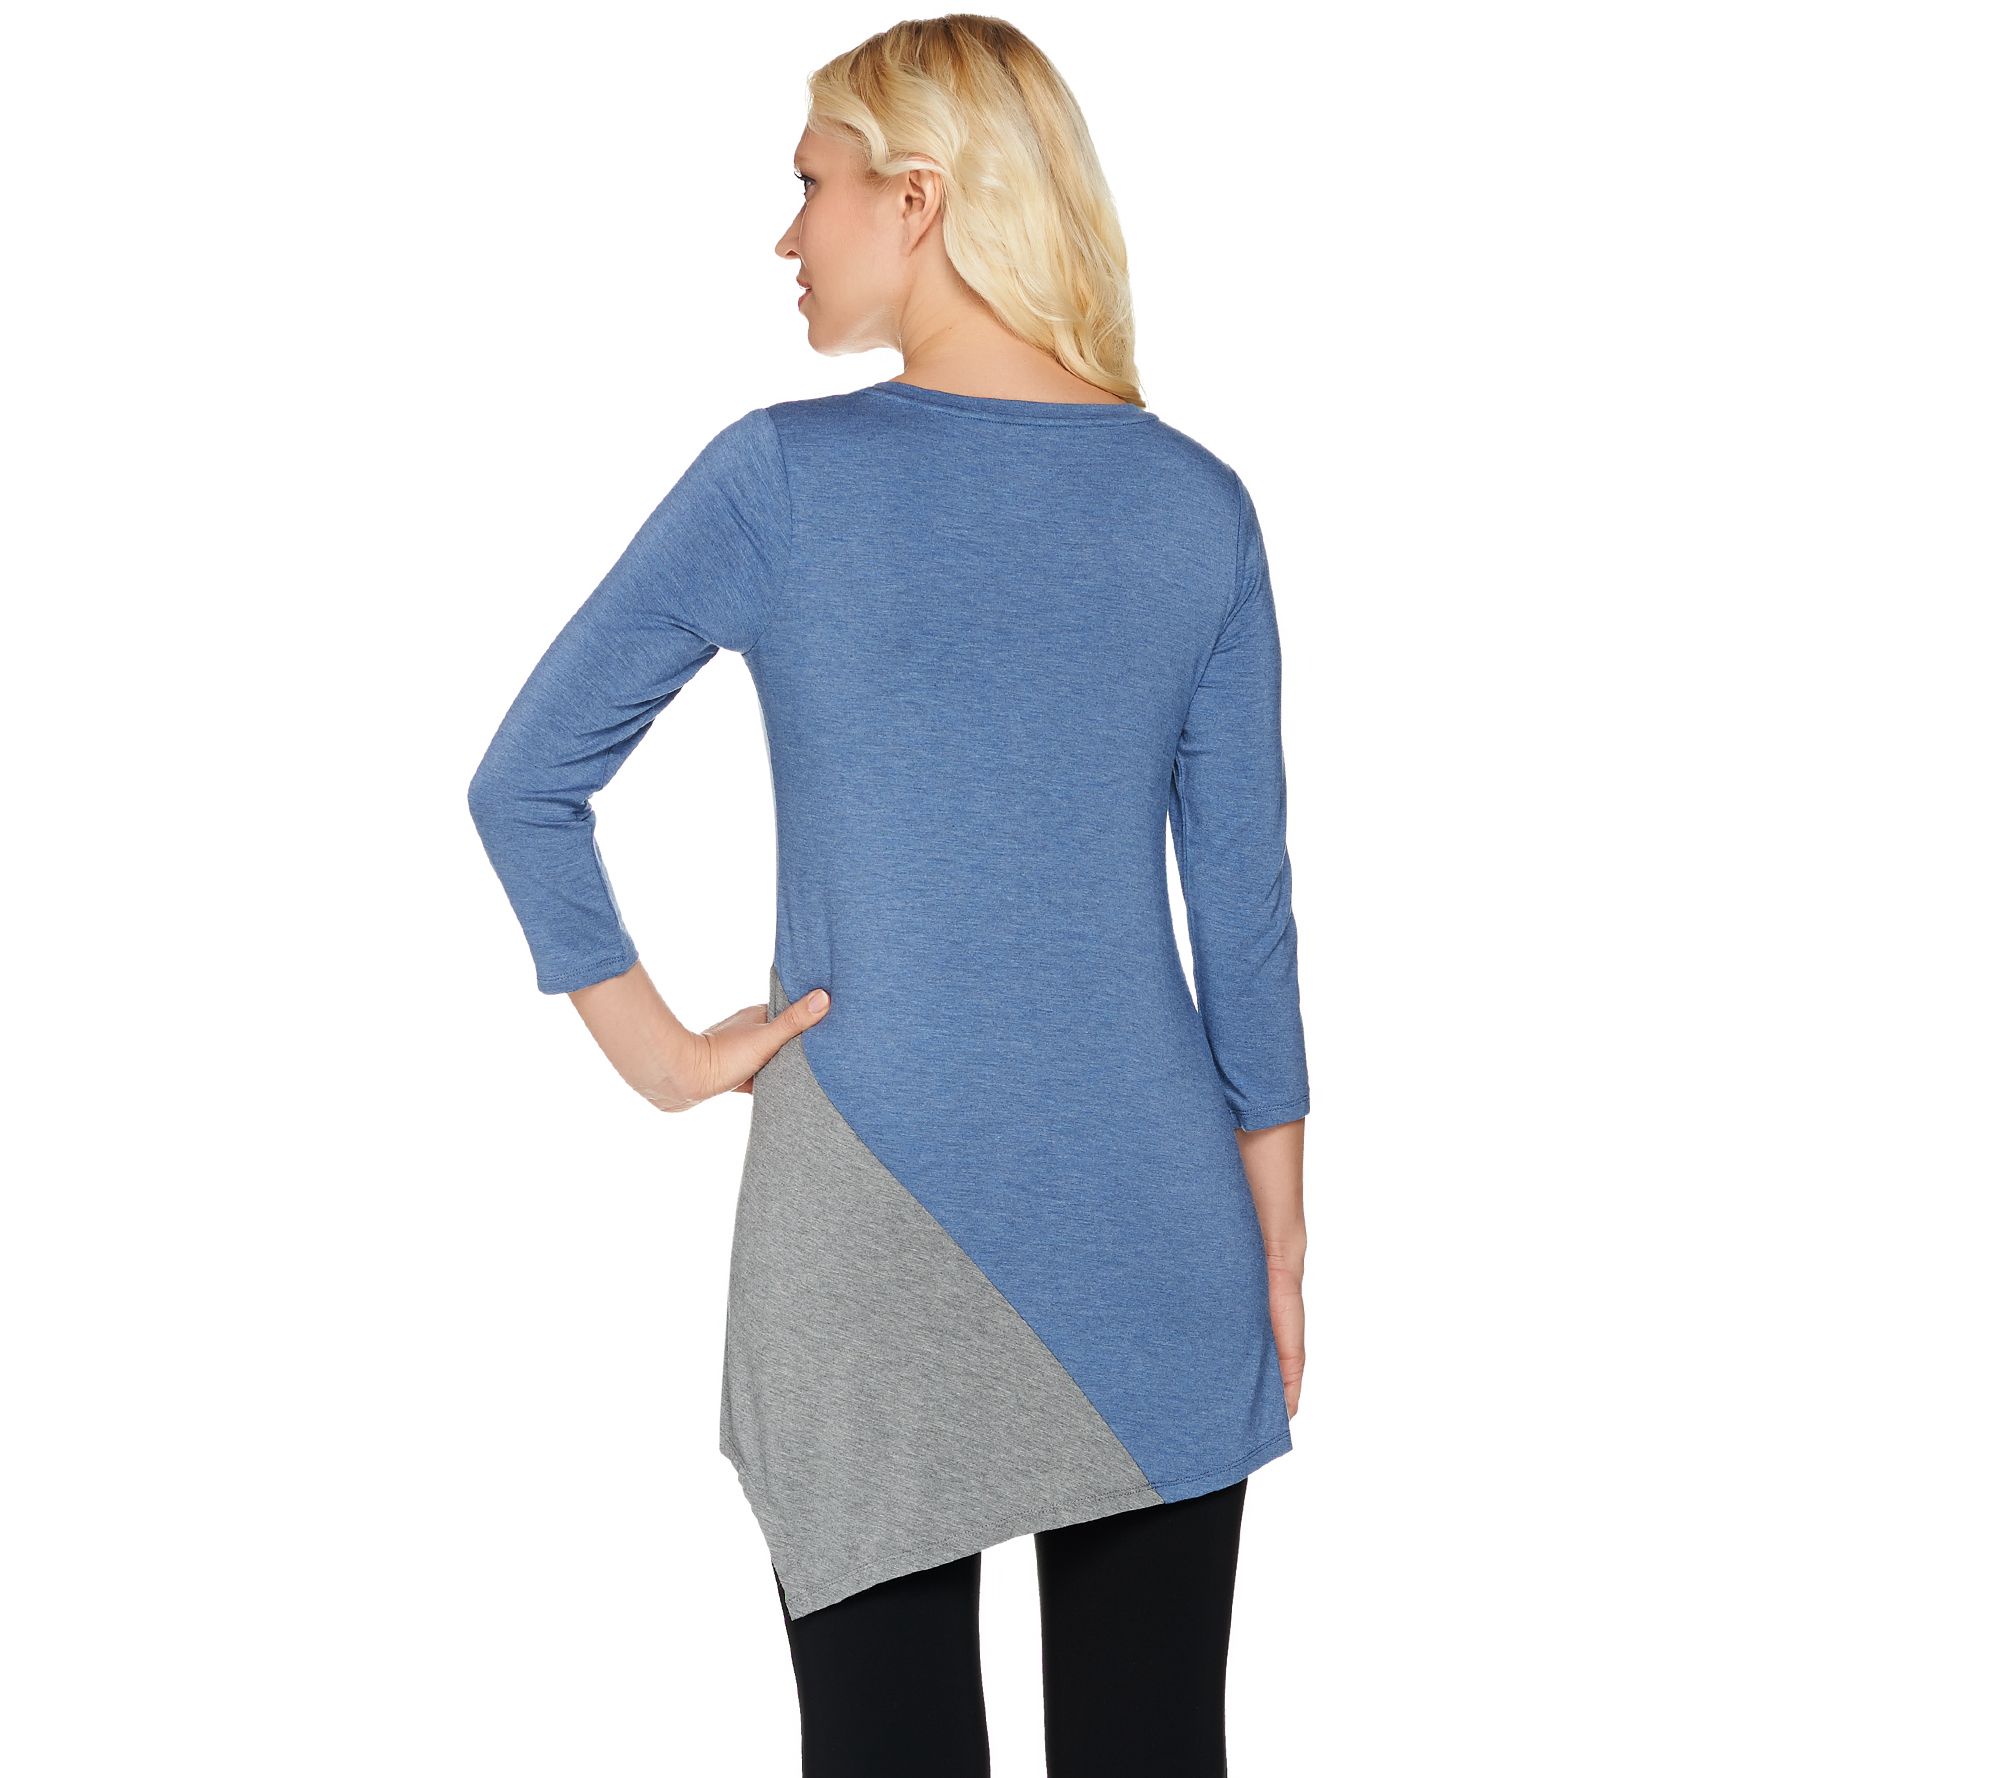 LOGO Layers by Lori Goldstein Heathered Color-Block Knit Top - QVC.com